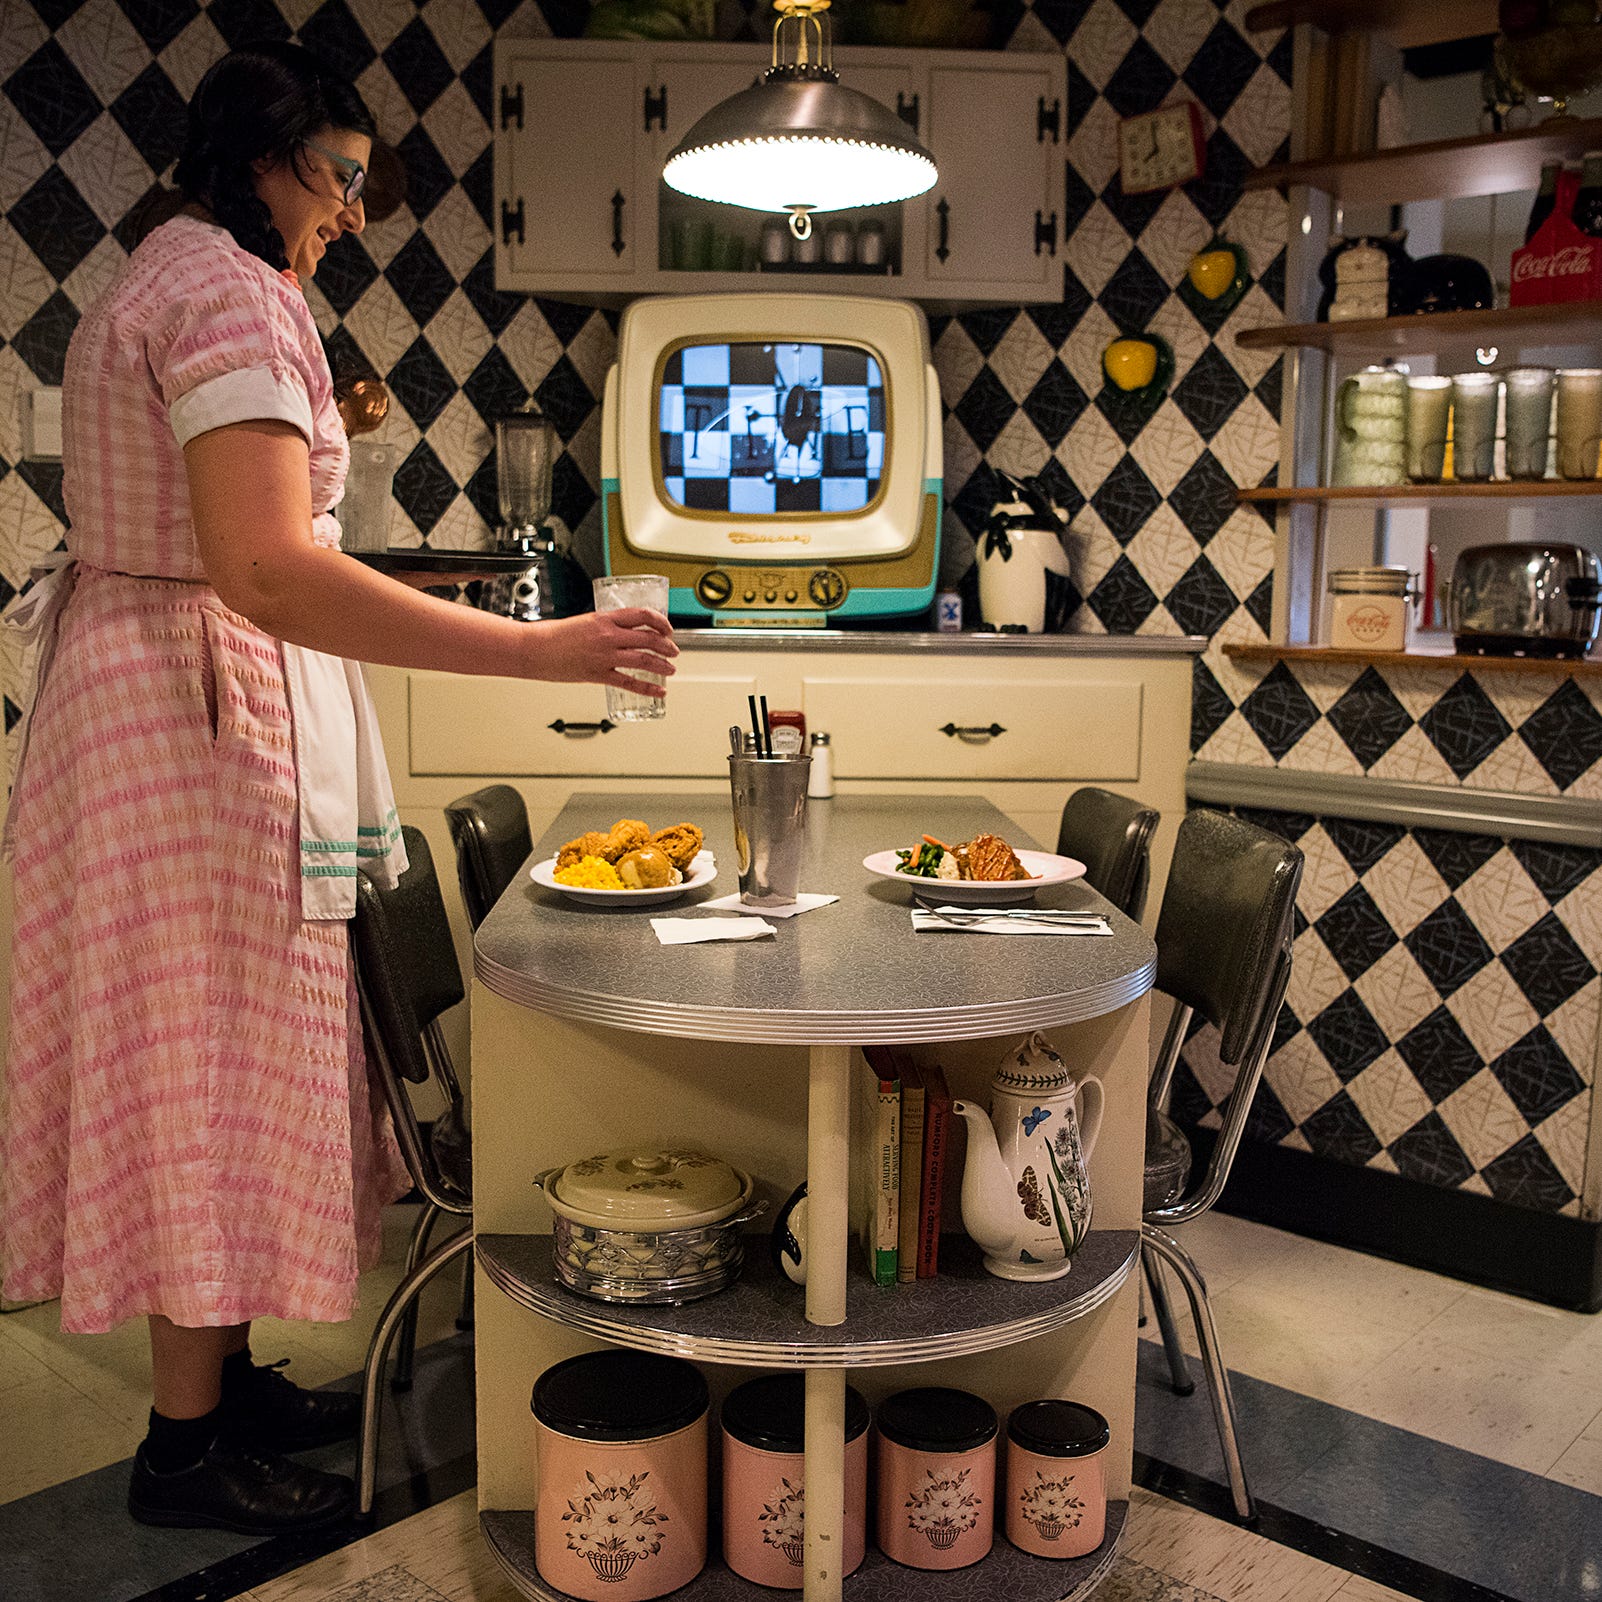 Jenn Havelock serves up an early lunch at 50's Prime Time Cafe at Disney World's Hollywood Studios theme park. The popular eatery makes diners feel right at home in the middle of the 20th century. Creature comforts at many of the tables include black